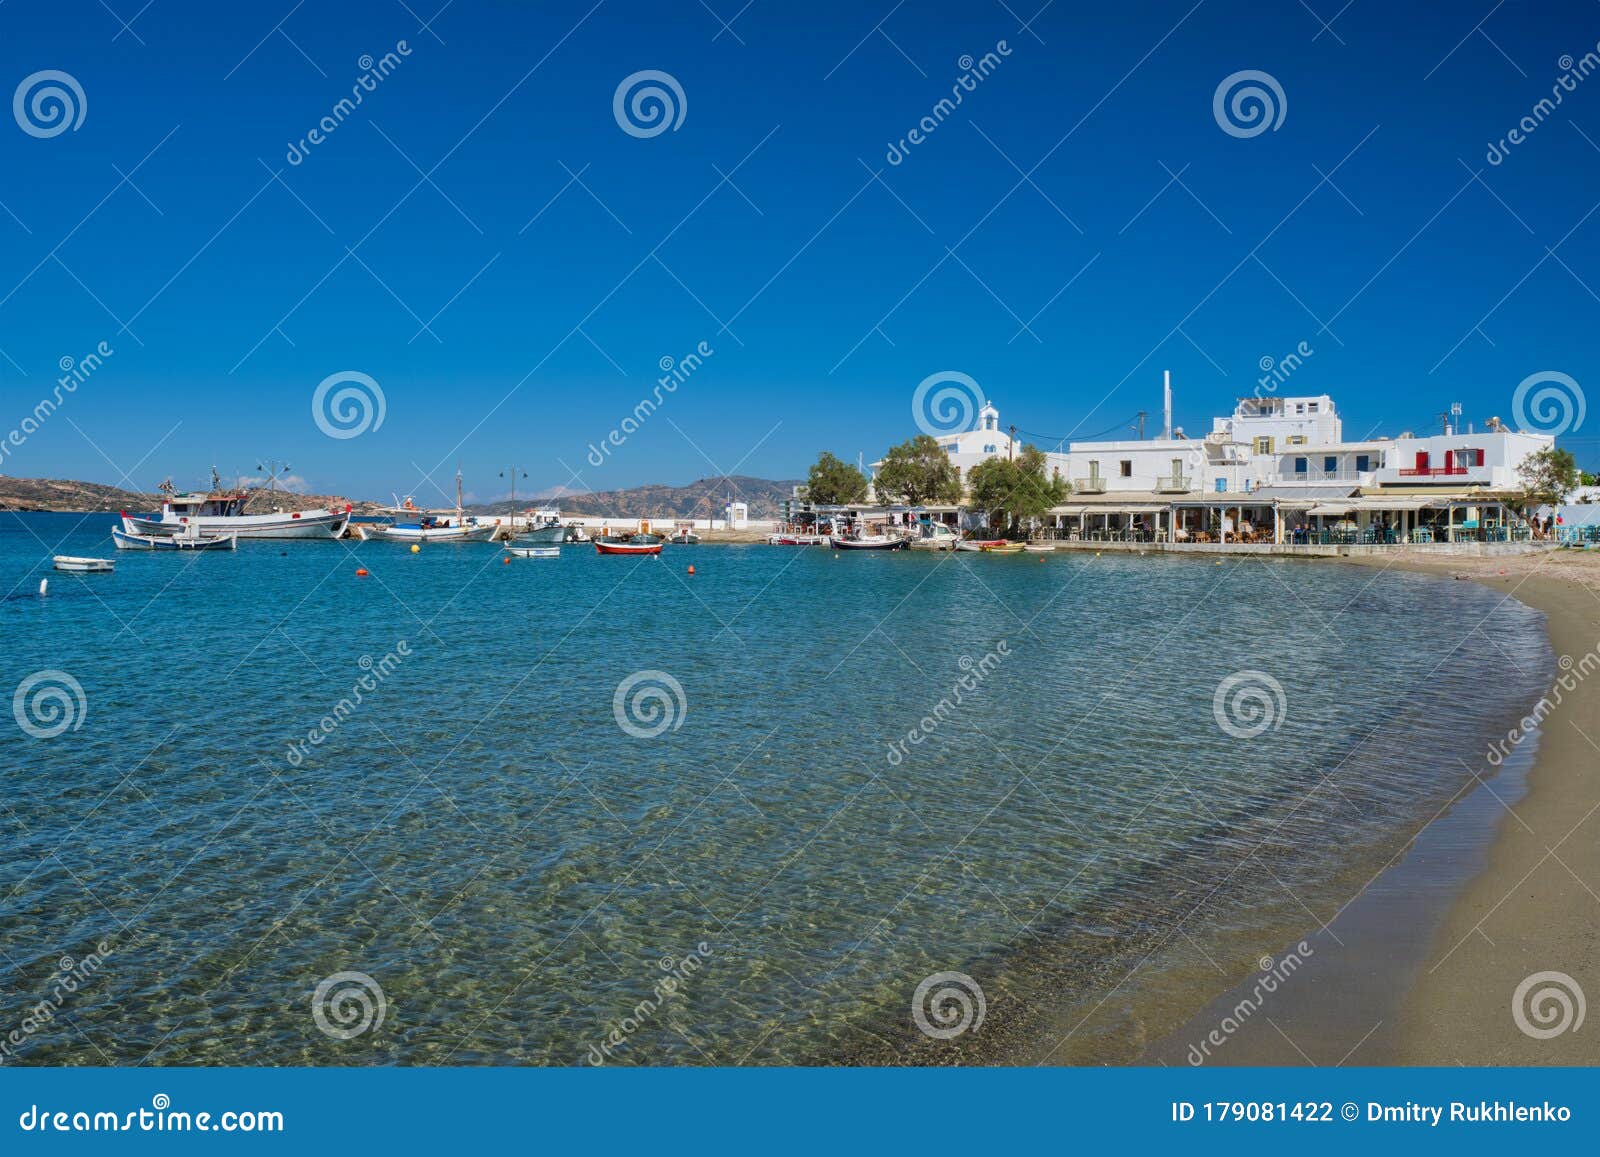 the beach and fishing village of pollonia in milos, greece